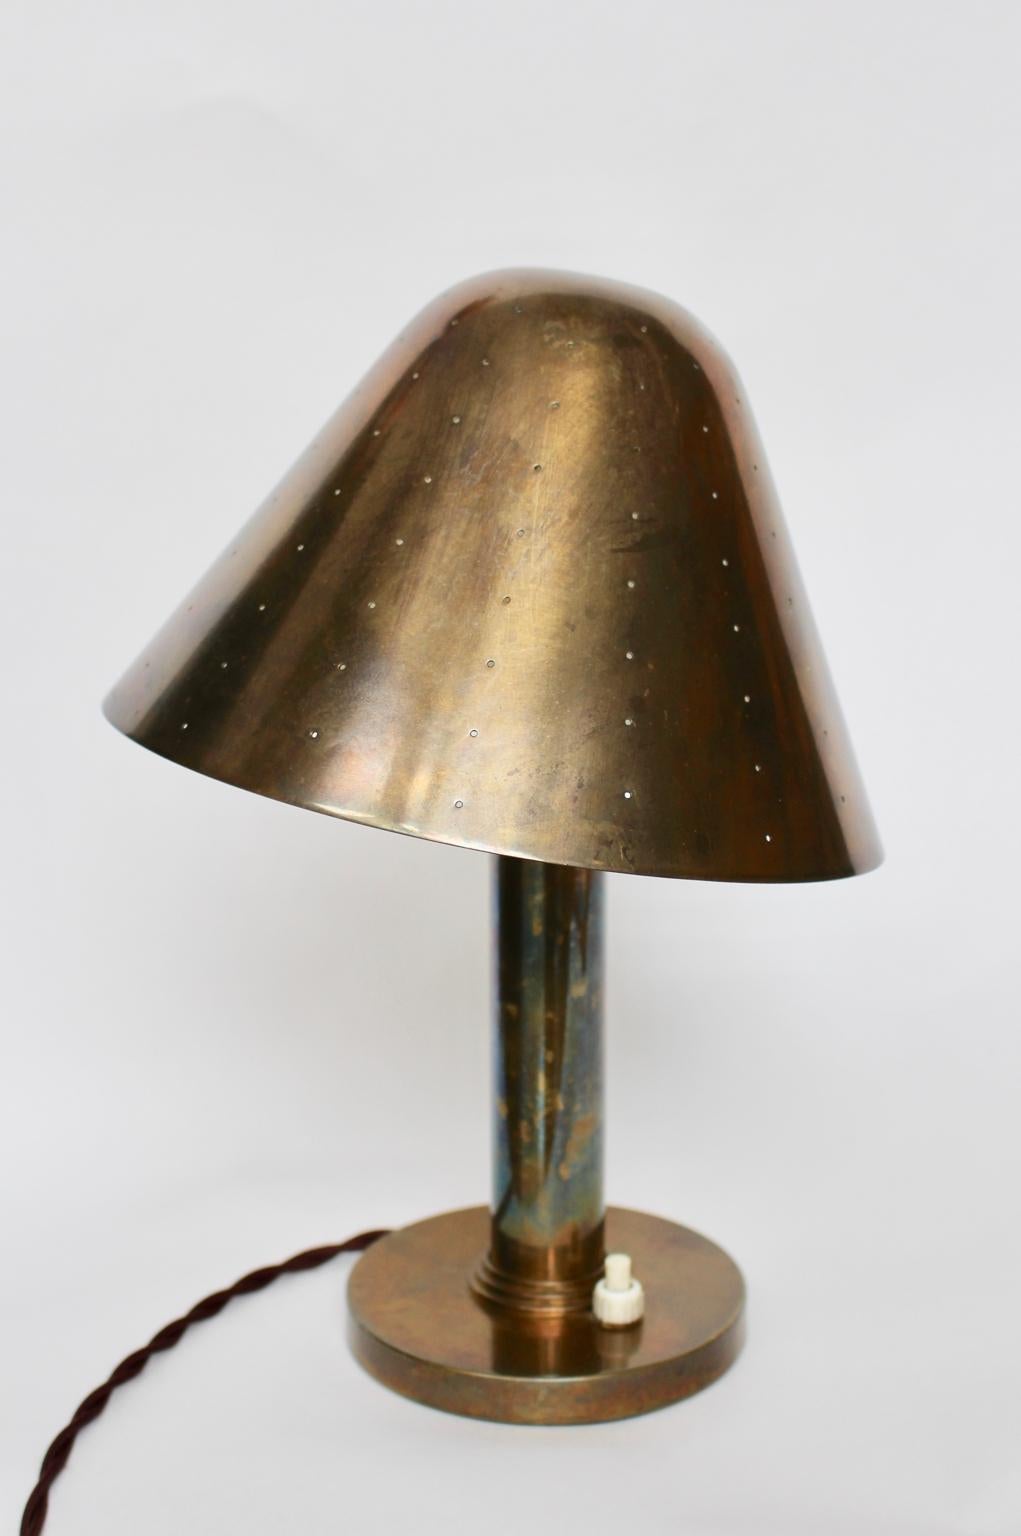 Swedish Mid-Century Modern Brass Table Lamp by Carl Axel Acking Attributed, 1940s Sweden